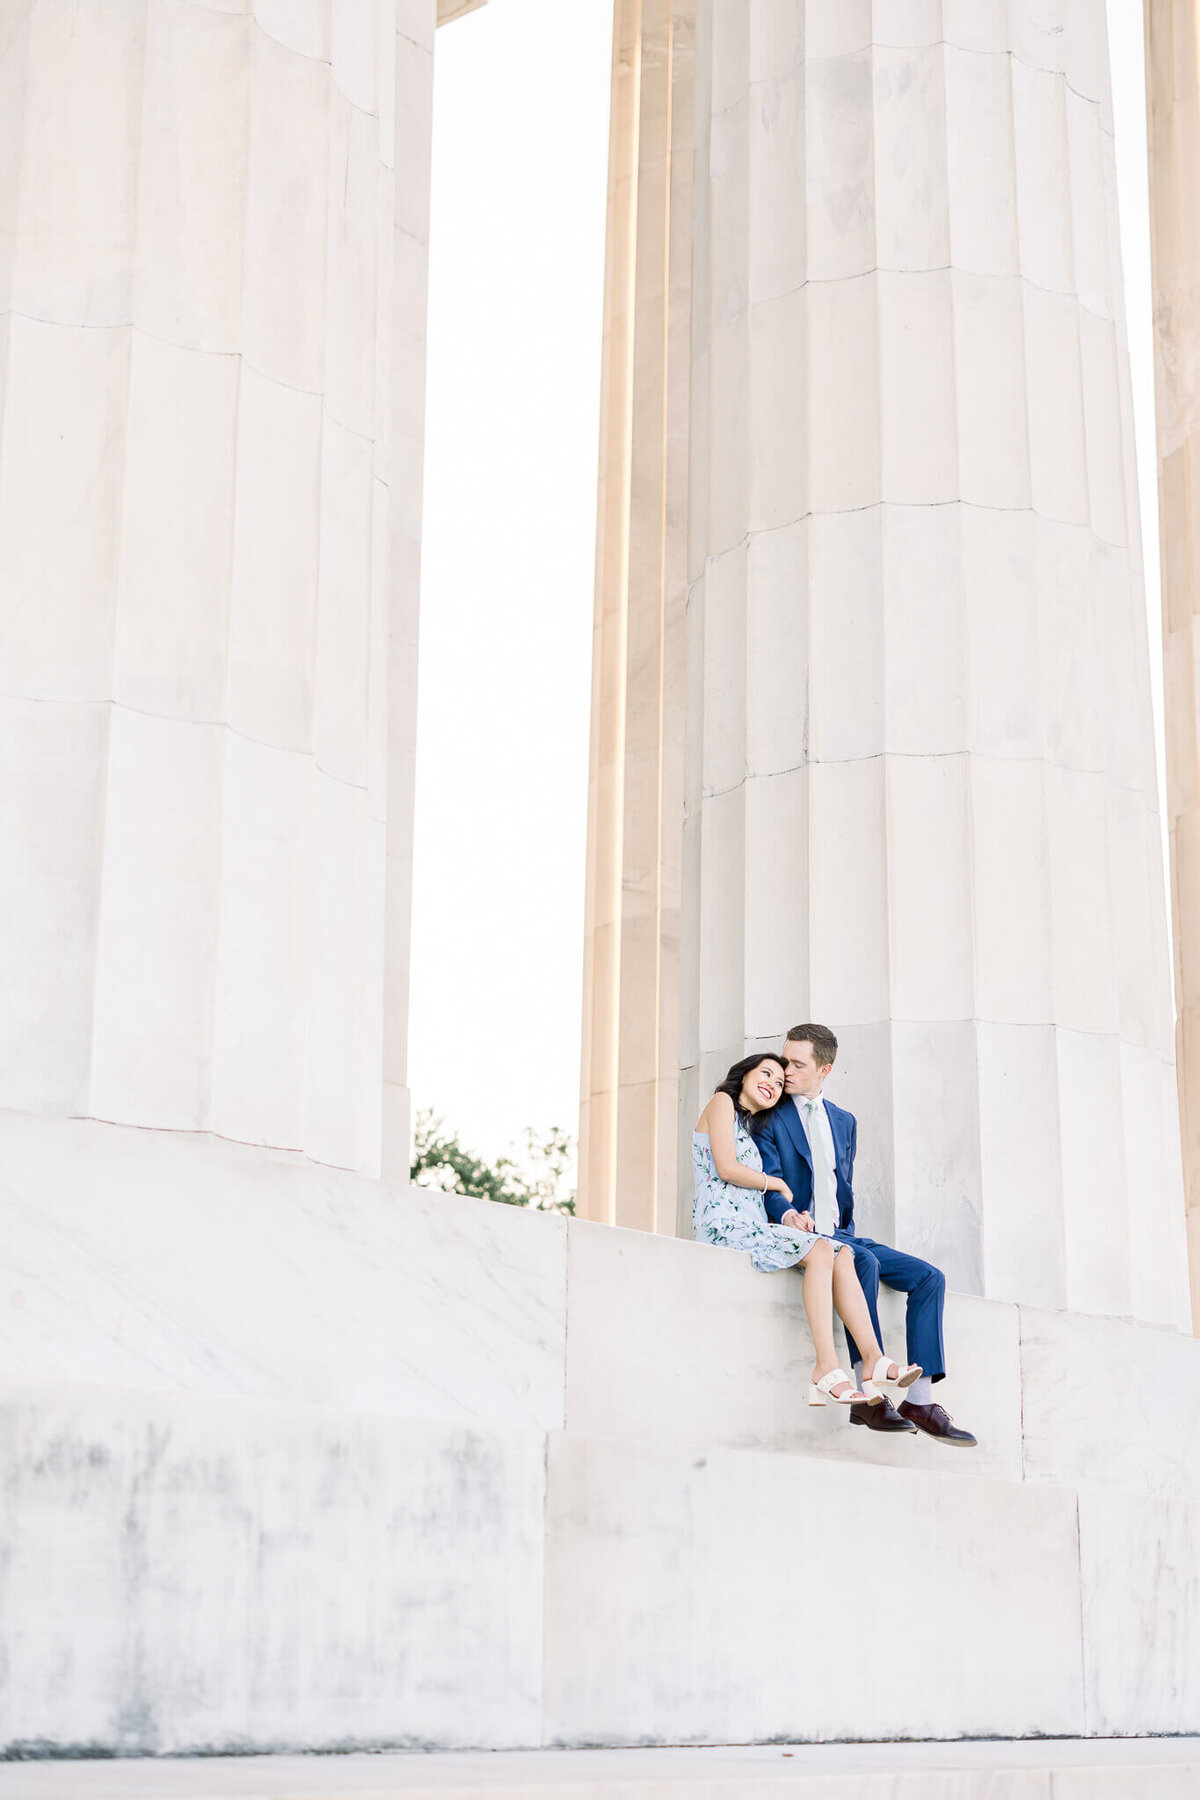 engagement-photography-lincoln-memorial-national-mall-couple-light-airy-washington-dc-80